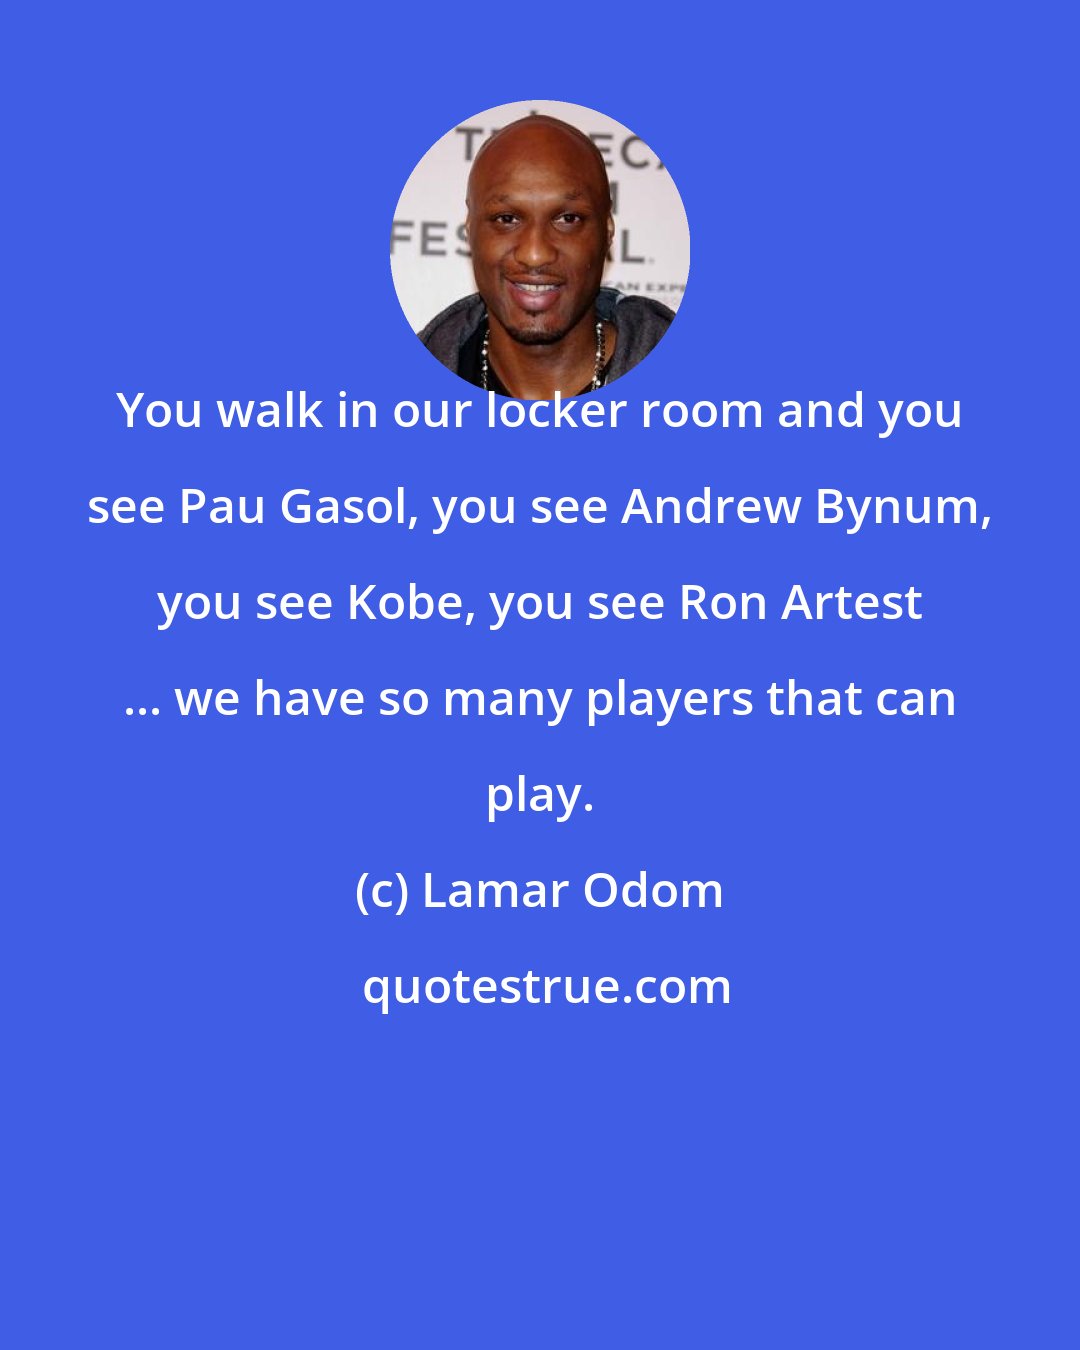 Lamar Odom: You walk in our locker room and you see Pau Gasol, you see Andrew Bynum, you see Kobe, you see Ron Artest ... we have so many players that can play.